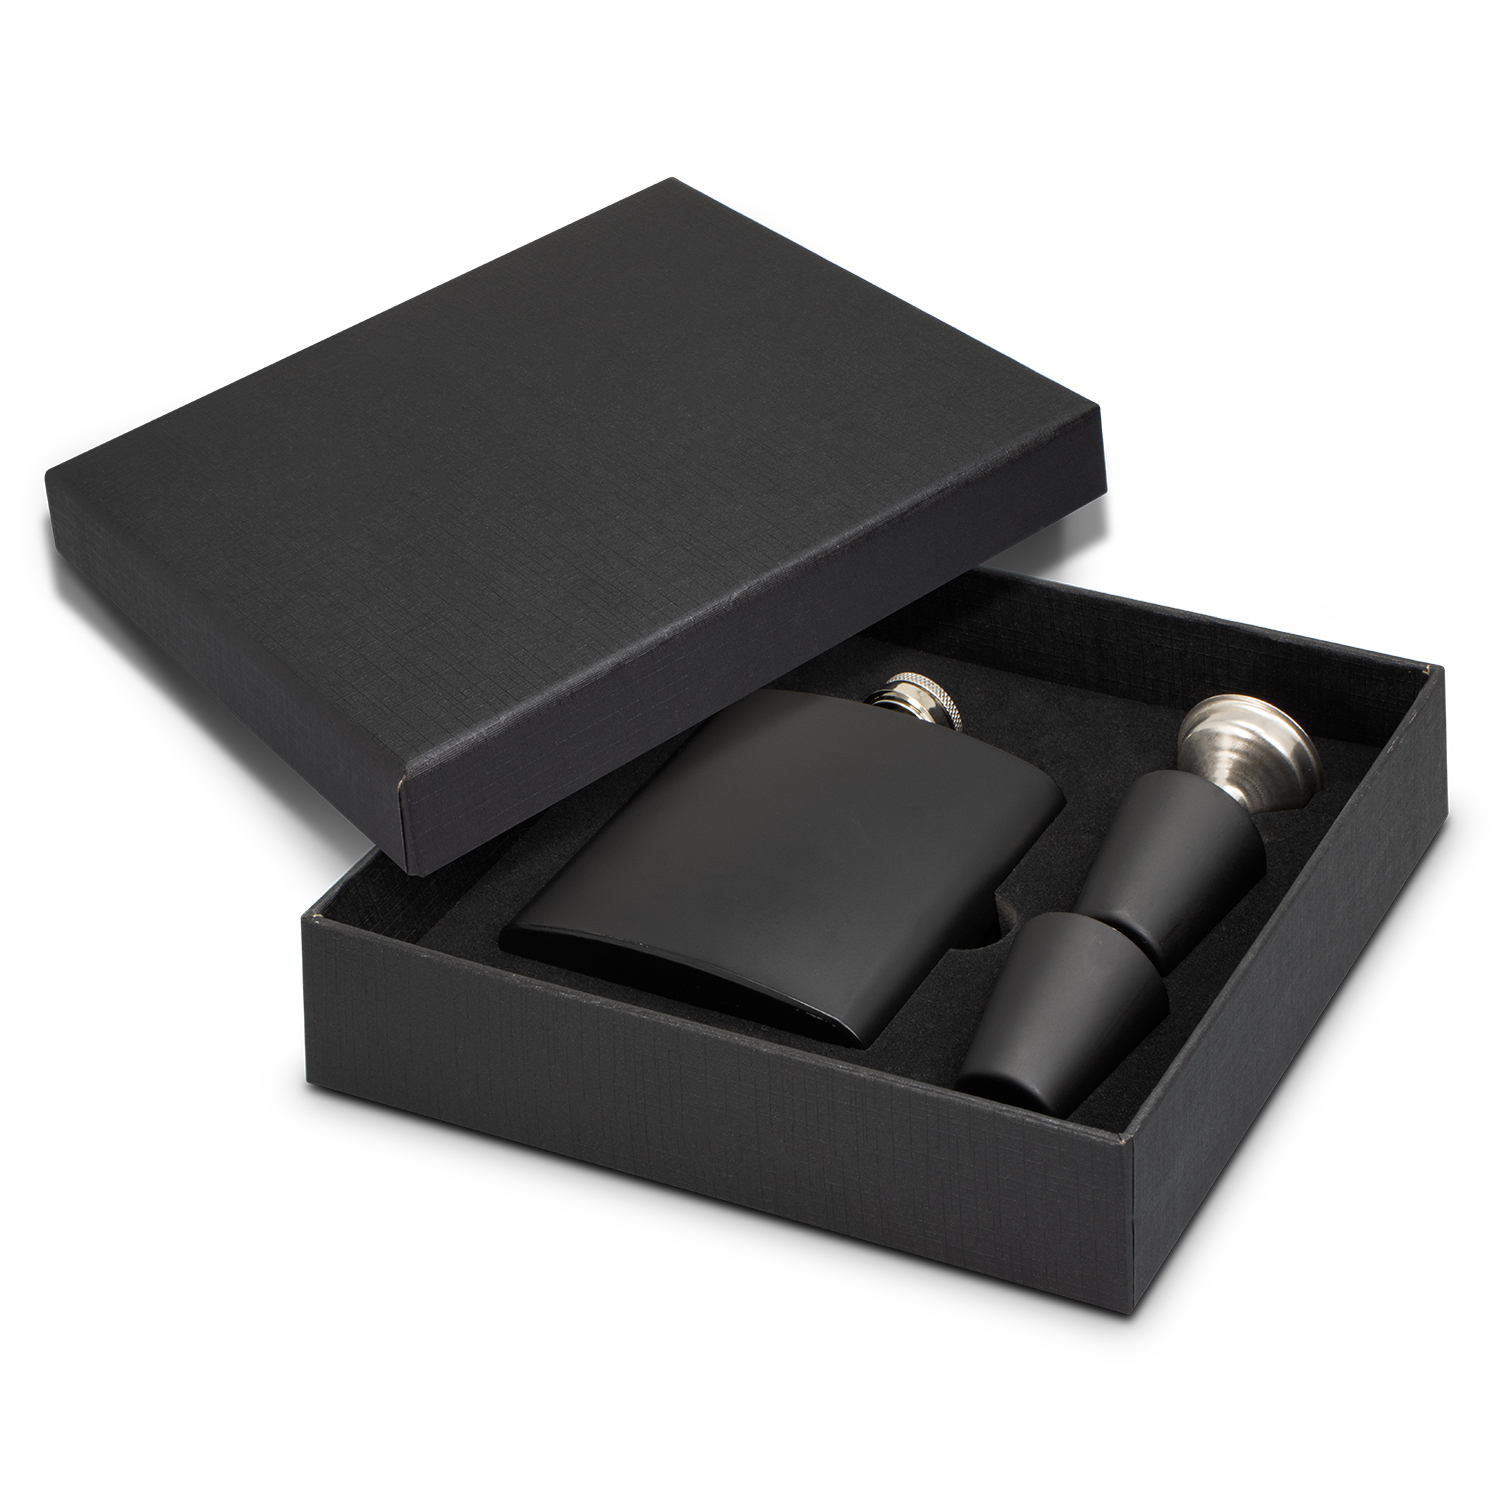 Custom Dalmore Hip Flask Gift Set  - Presented in a black or natural coloured Gift Box